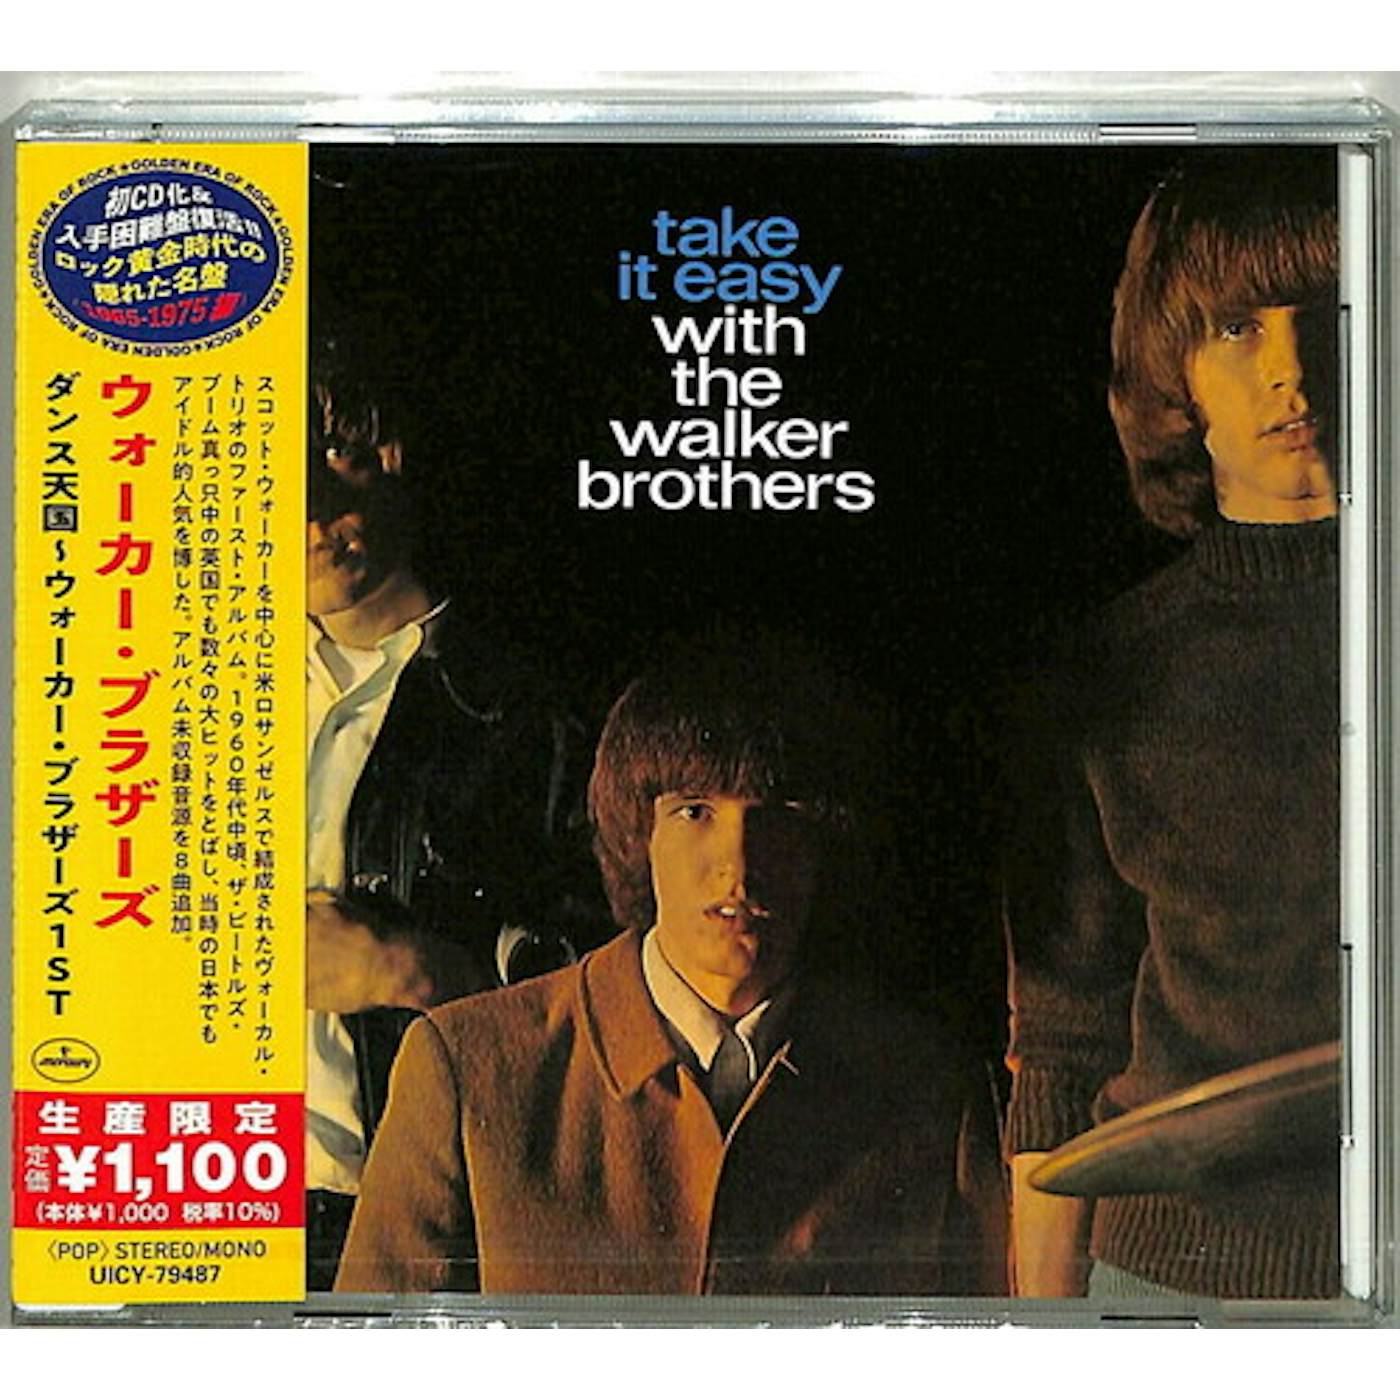 TAKE IT EASY WITH THE WALKER BROTHERS CD